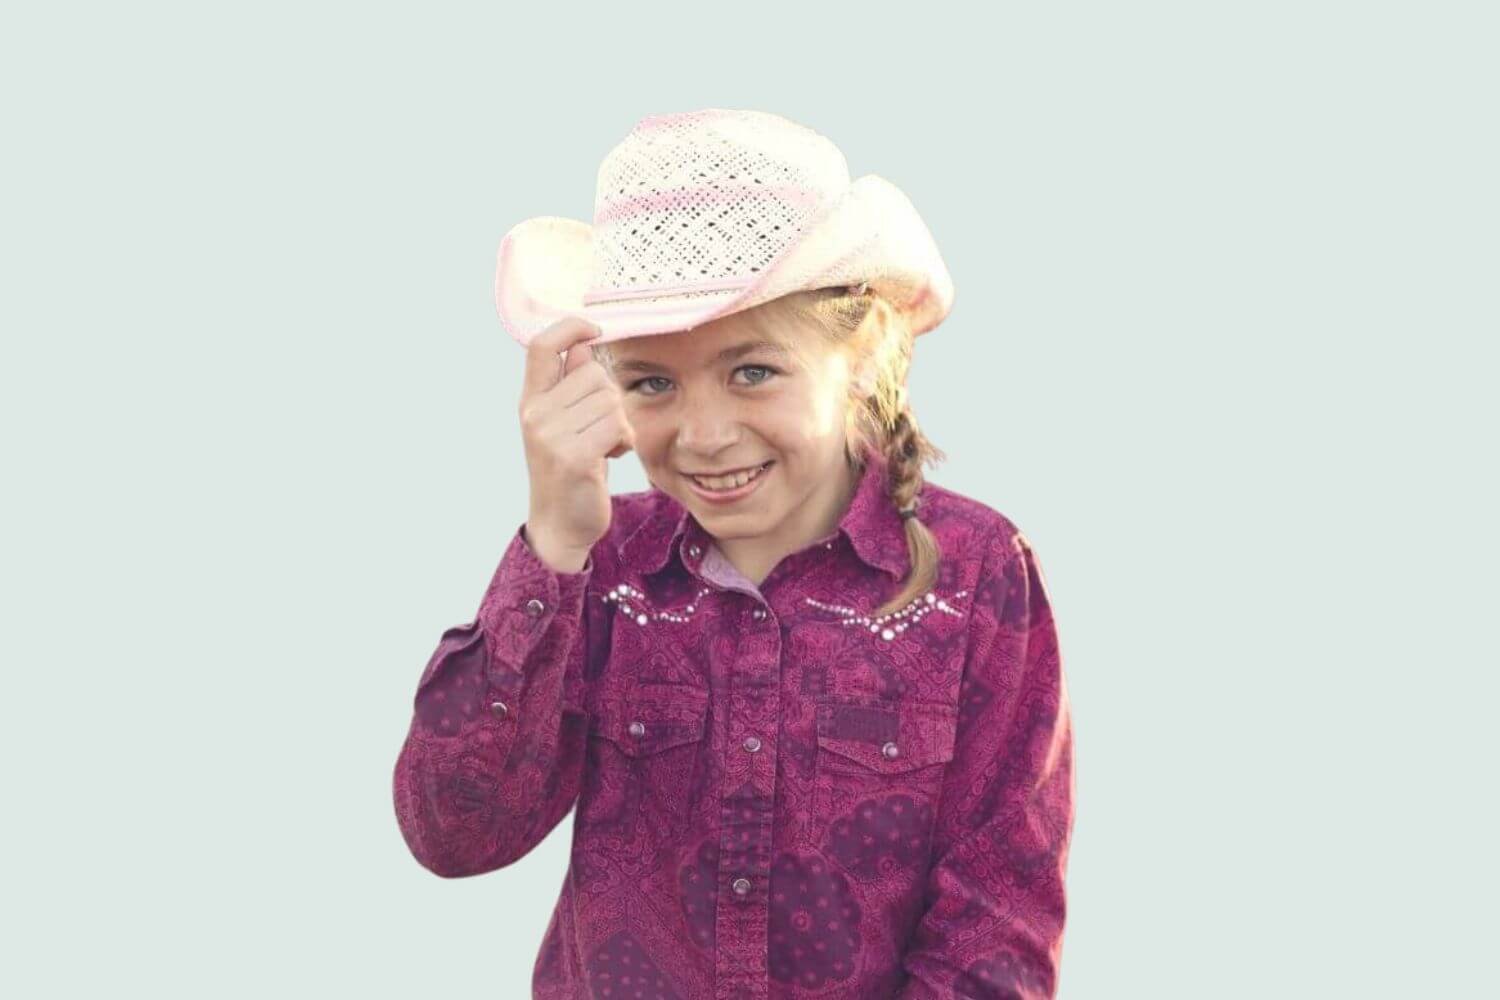 southern girl wearing pink country western clothes and hat